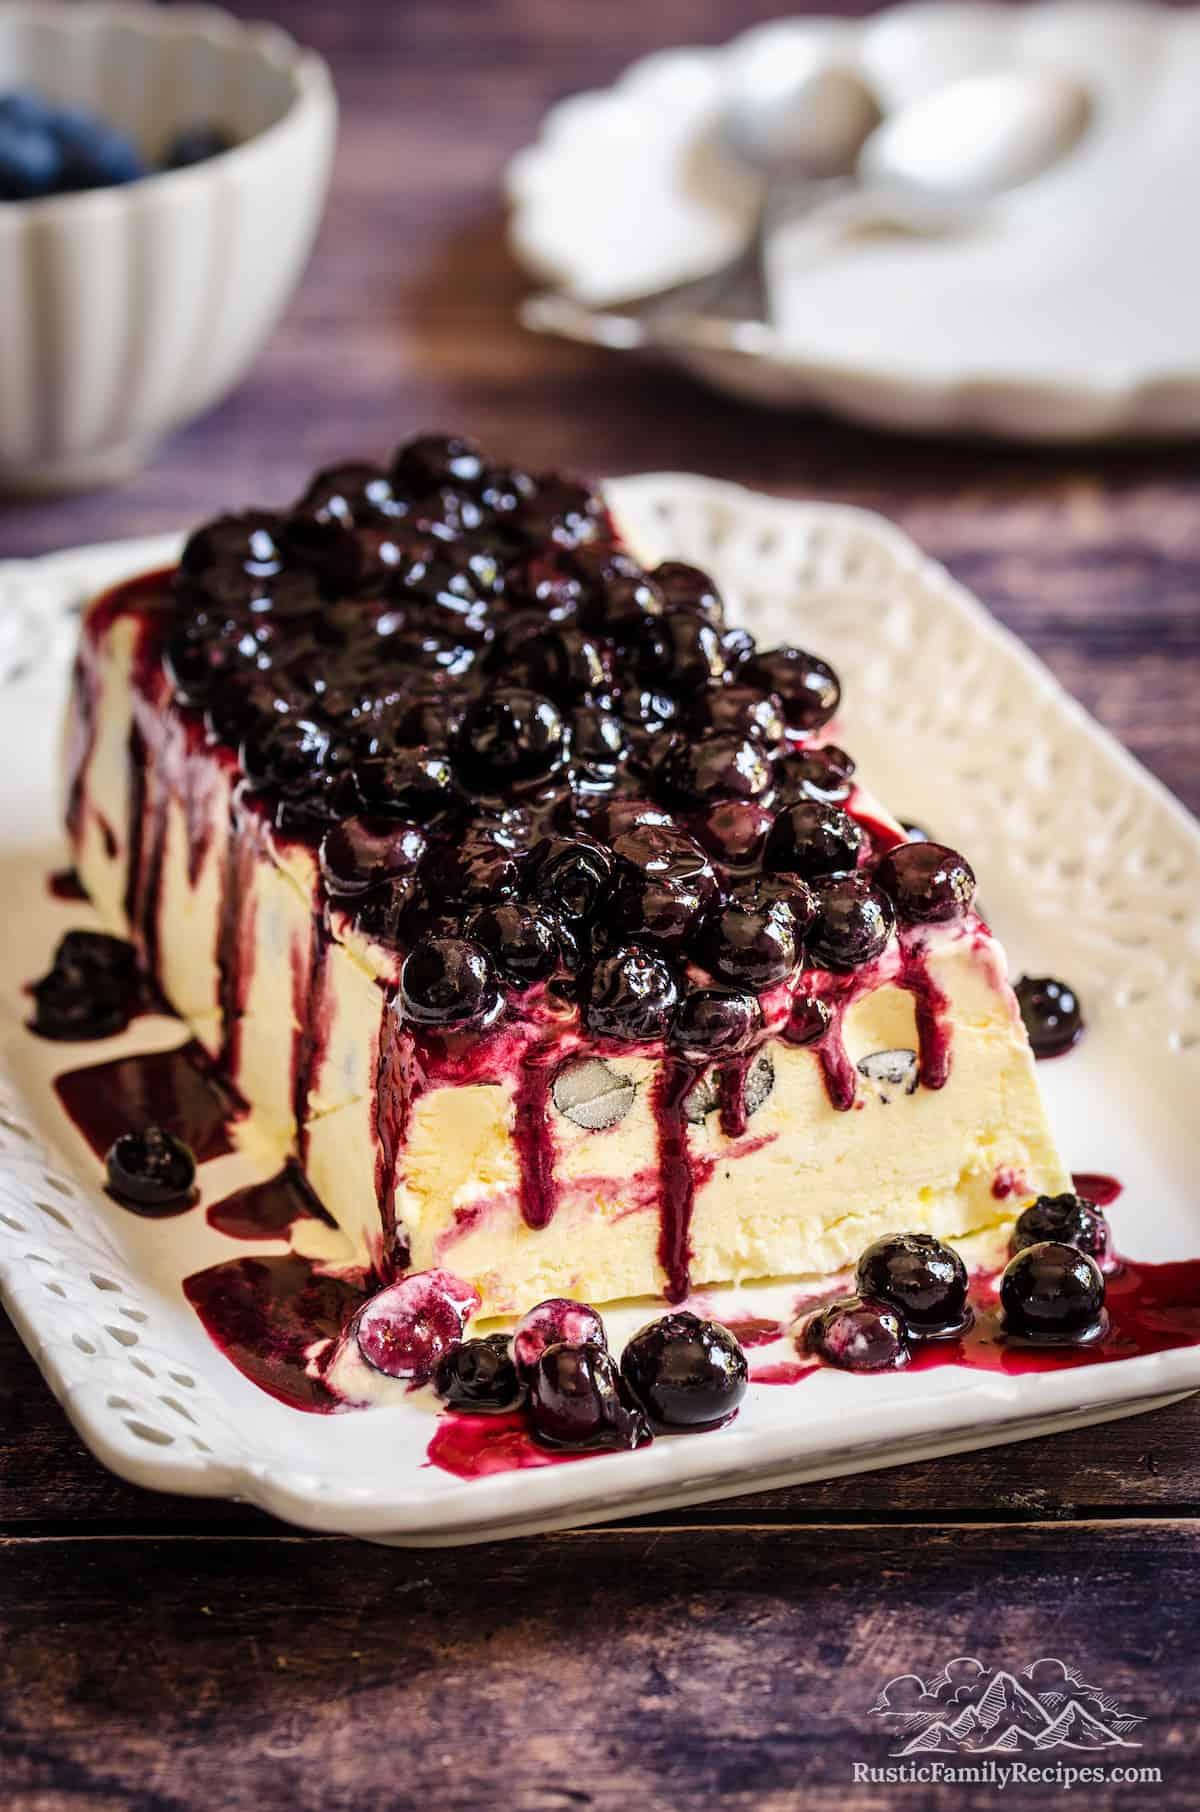 Lemon blueberry semifreddo on a plate topped with homemade blueberry sauce.